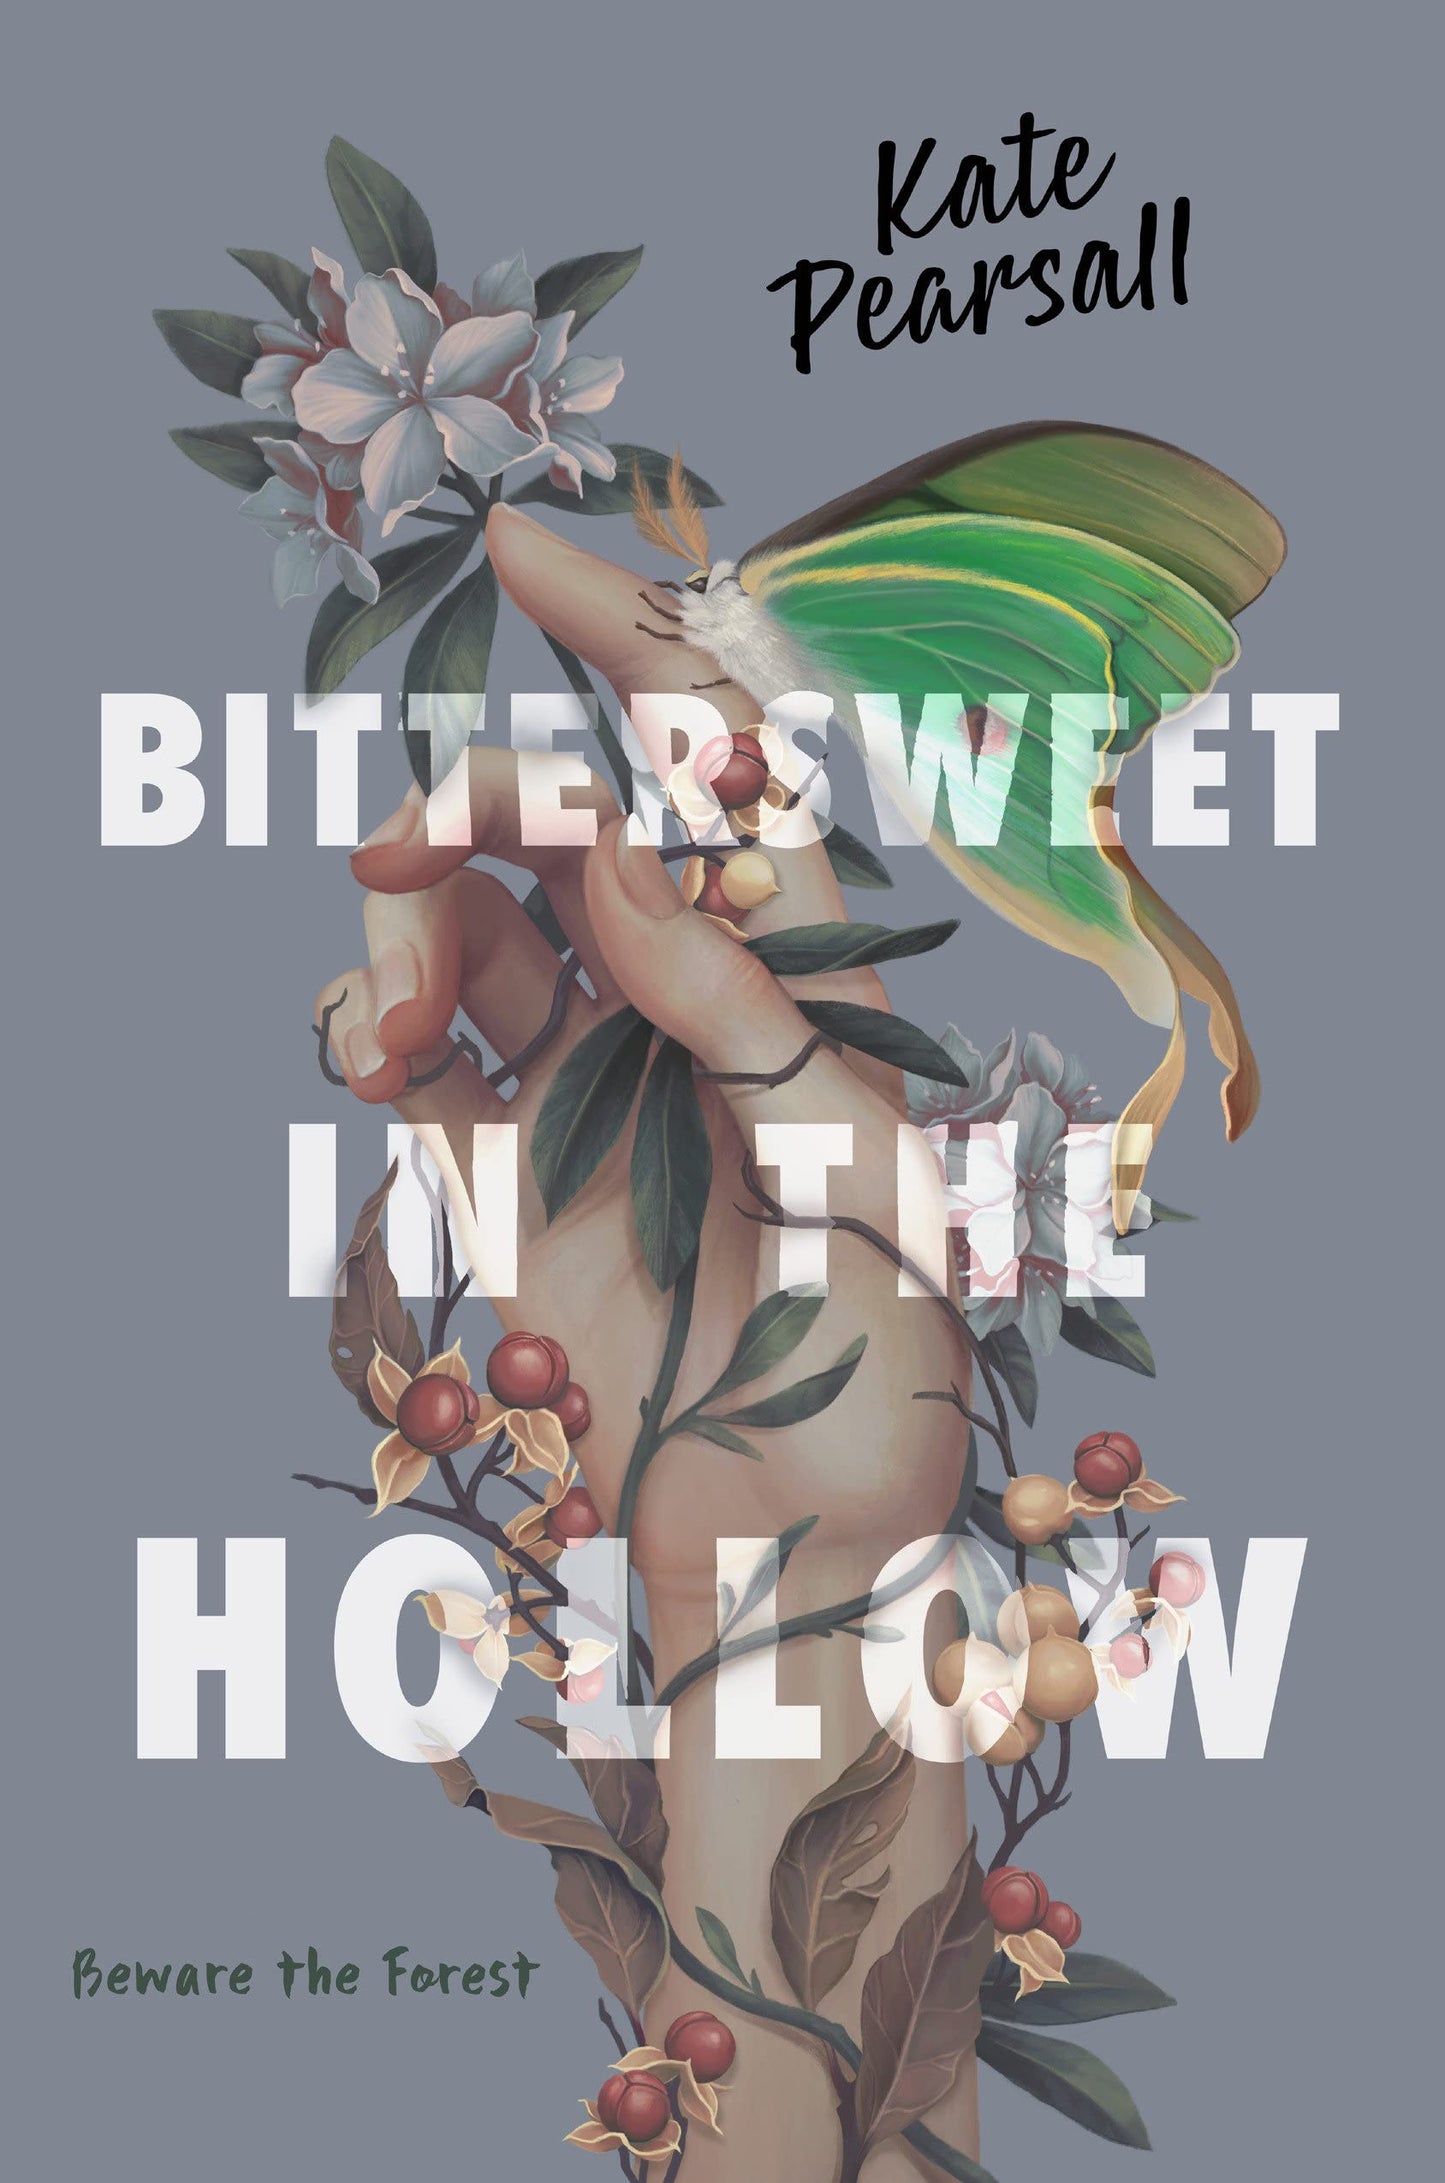 Bittersweet in the Hollow - Kate Pearsall